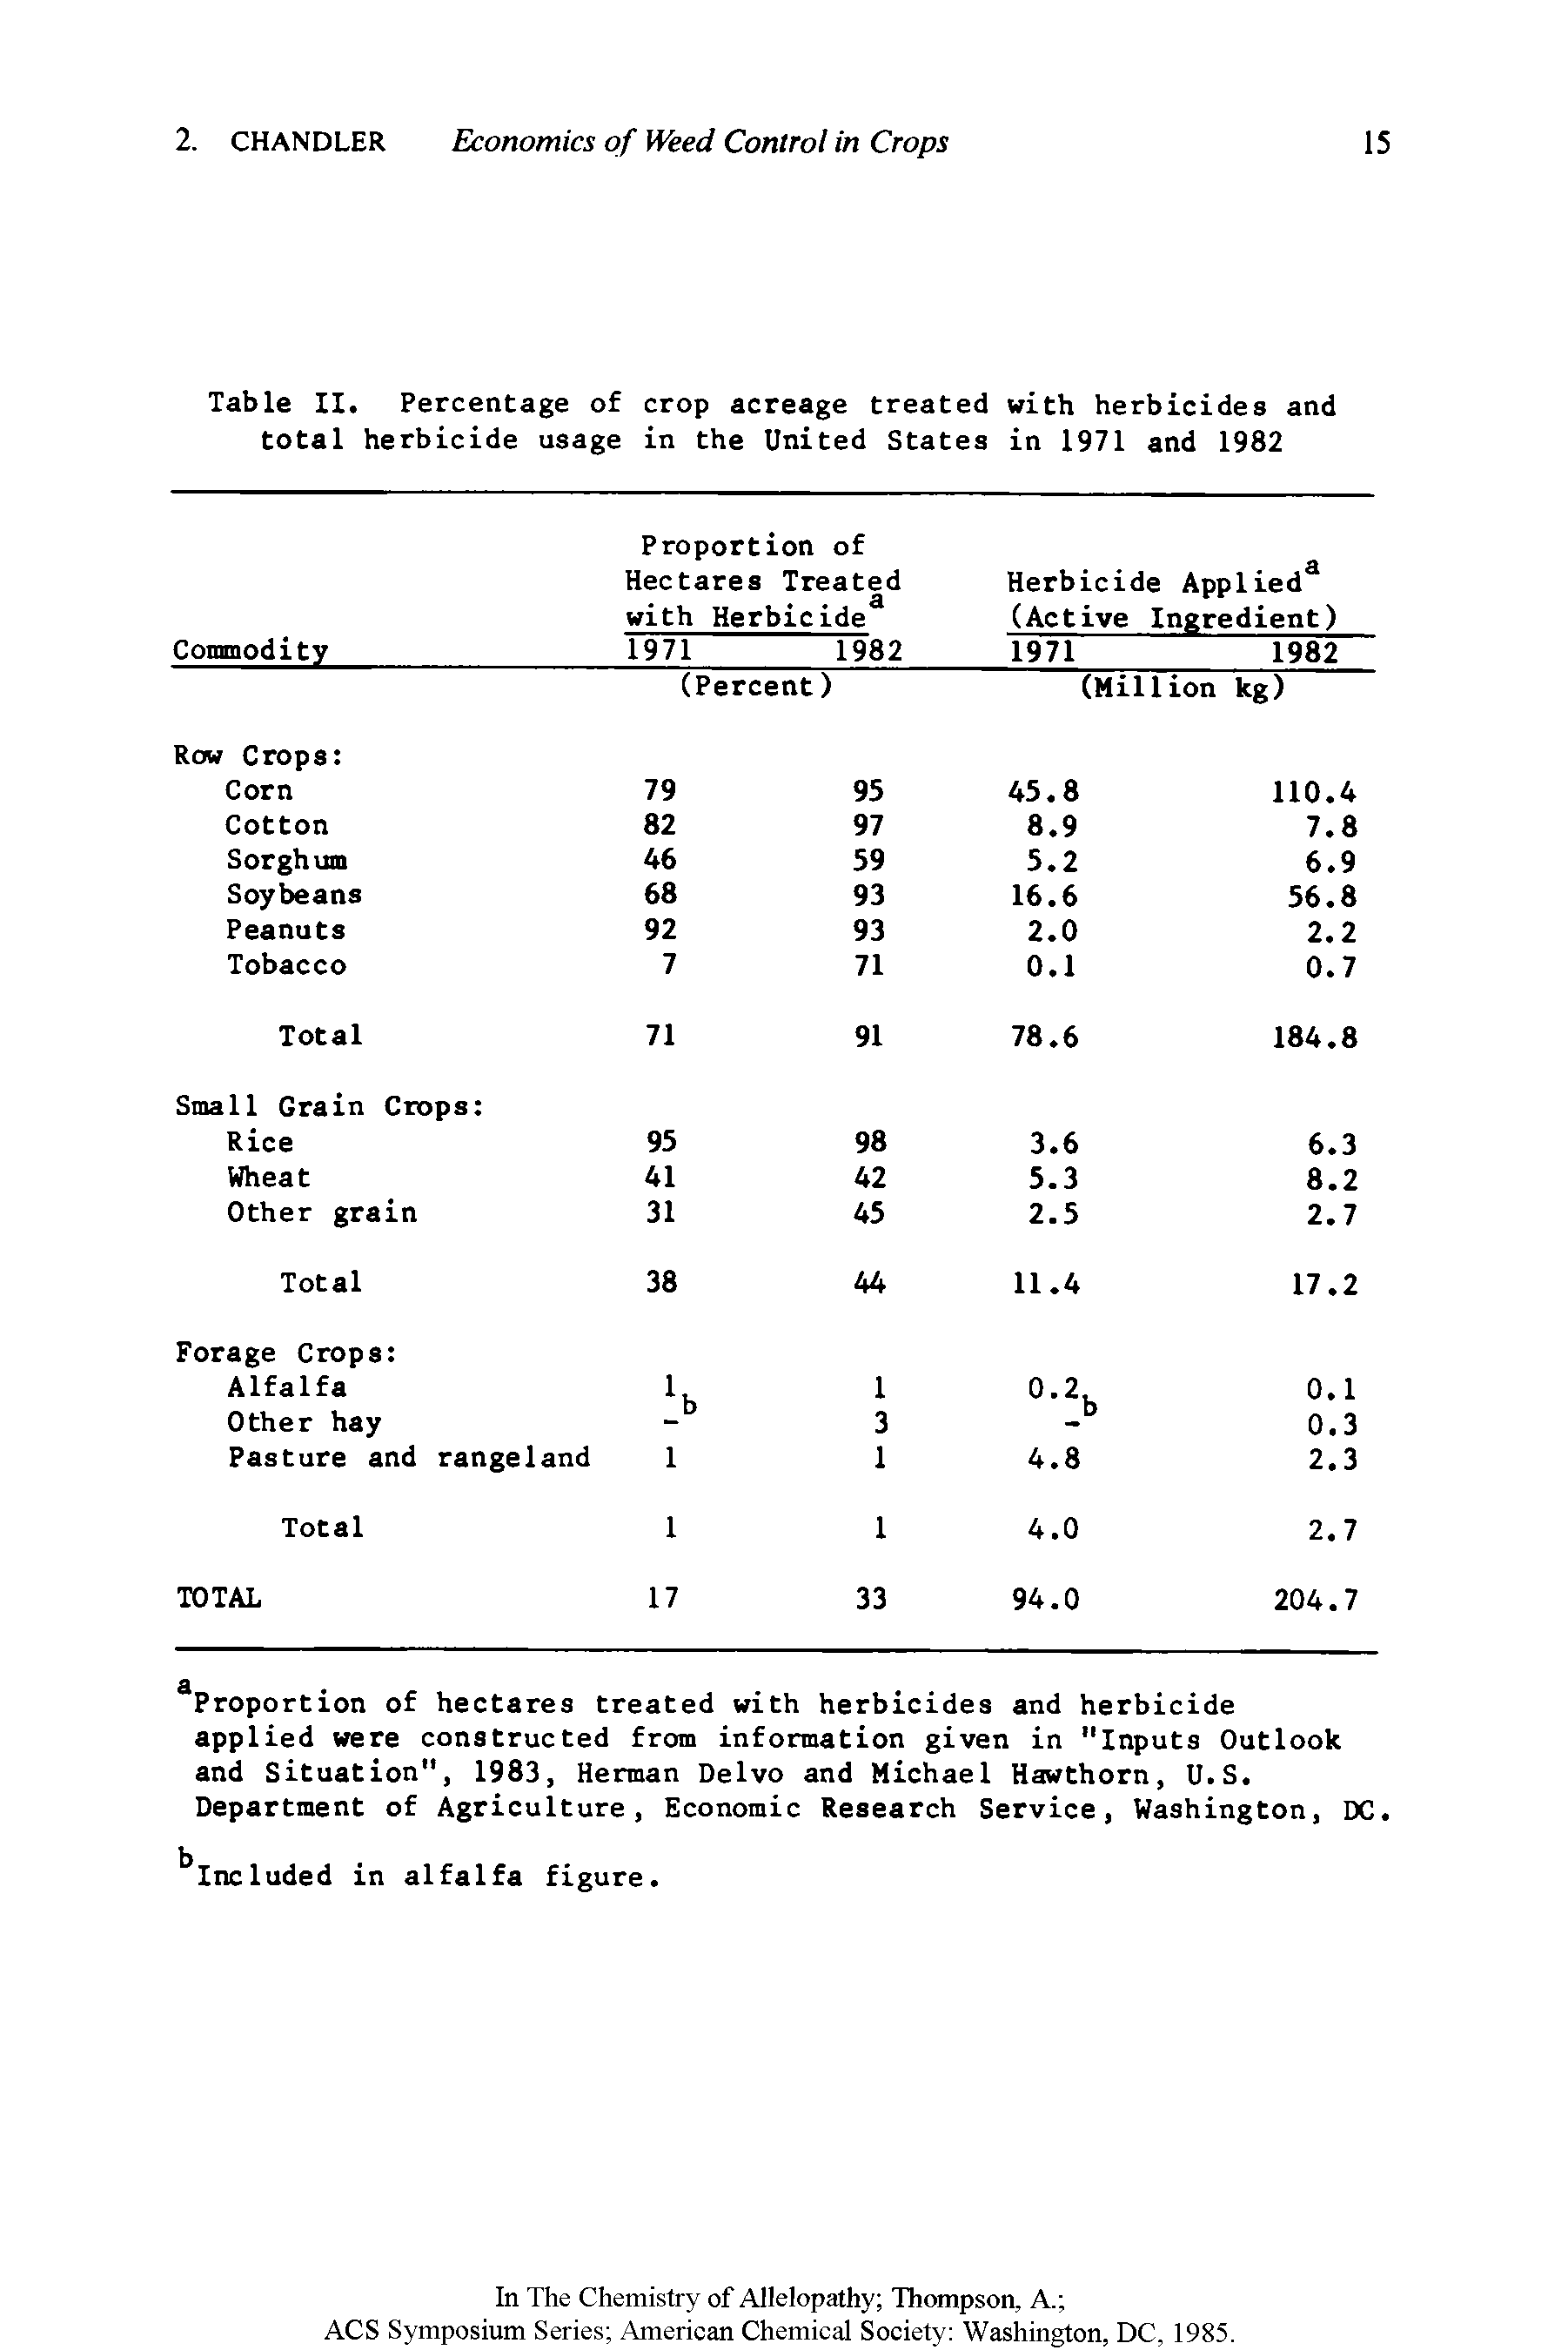 Table II. Percentage of crop acreage treated with herbicides and total herbicide usage in the United States in 1971 and 1982...